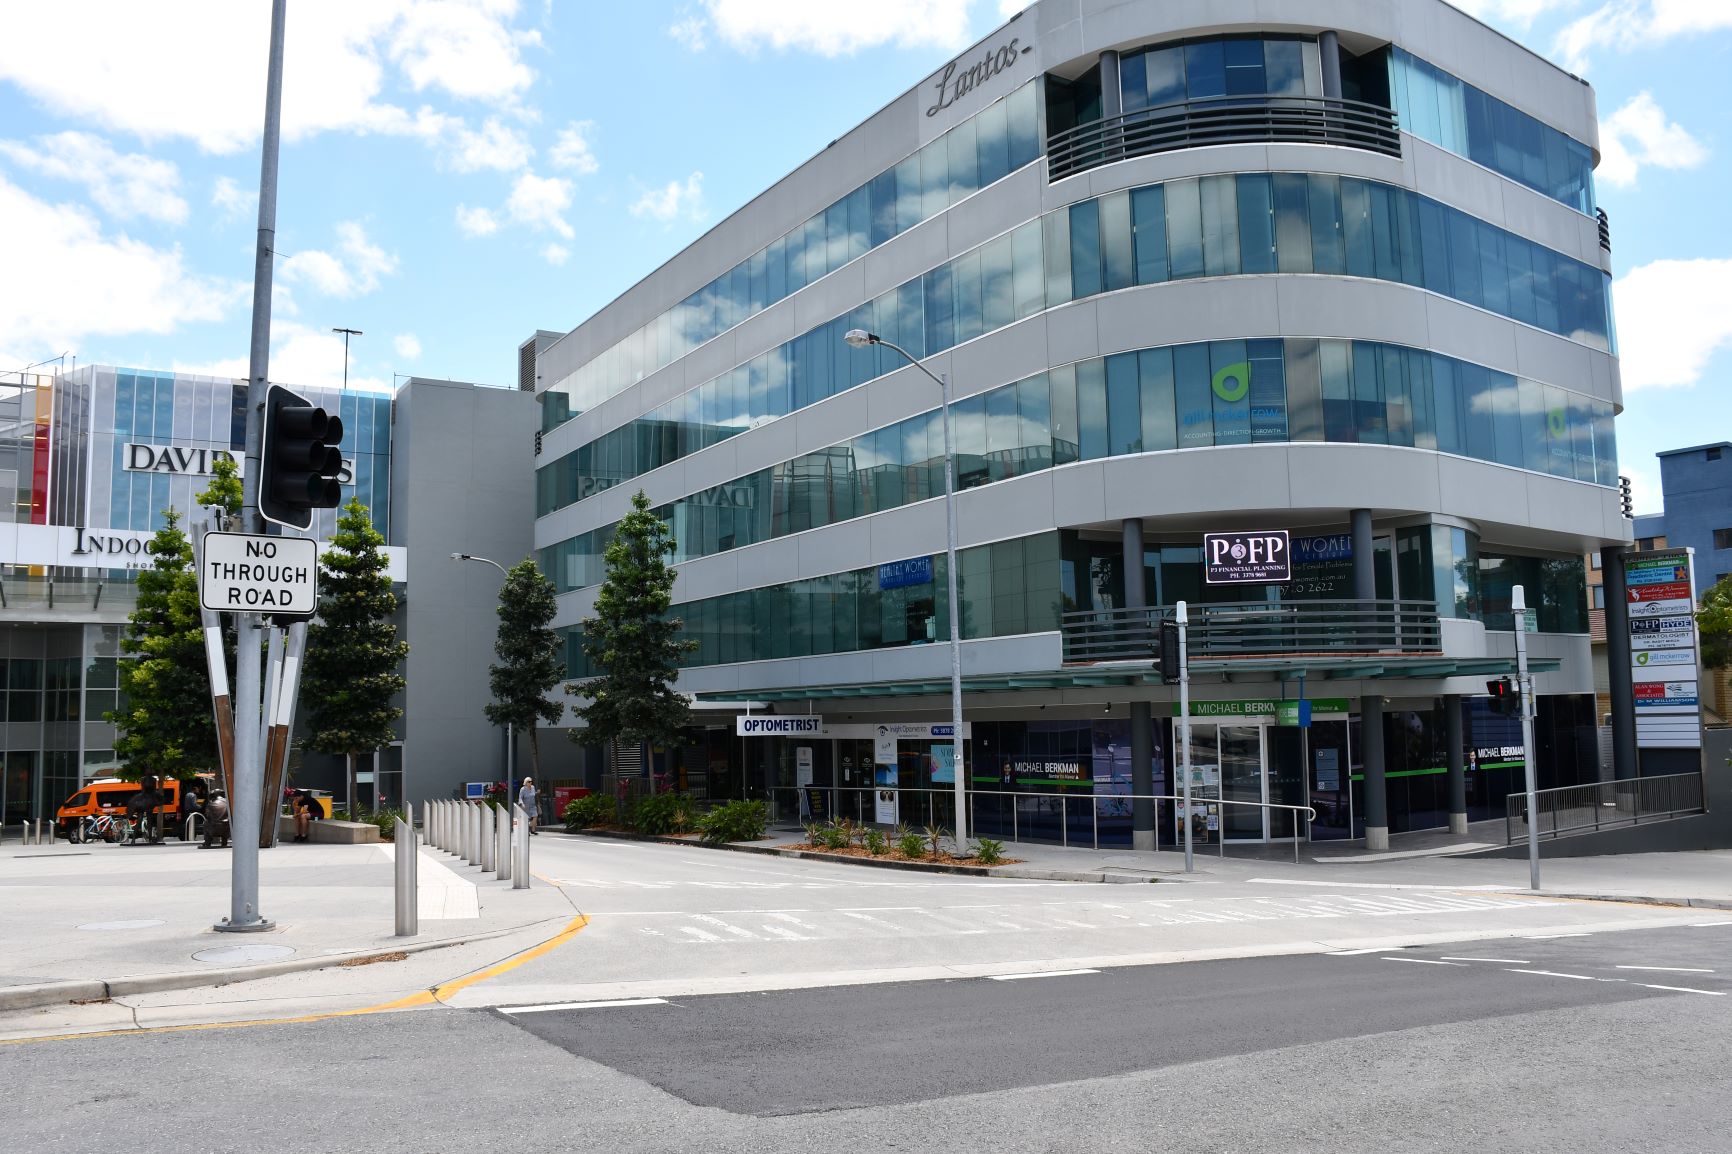 LANTOS PLACE - Indooroopilly